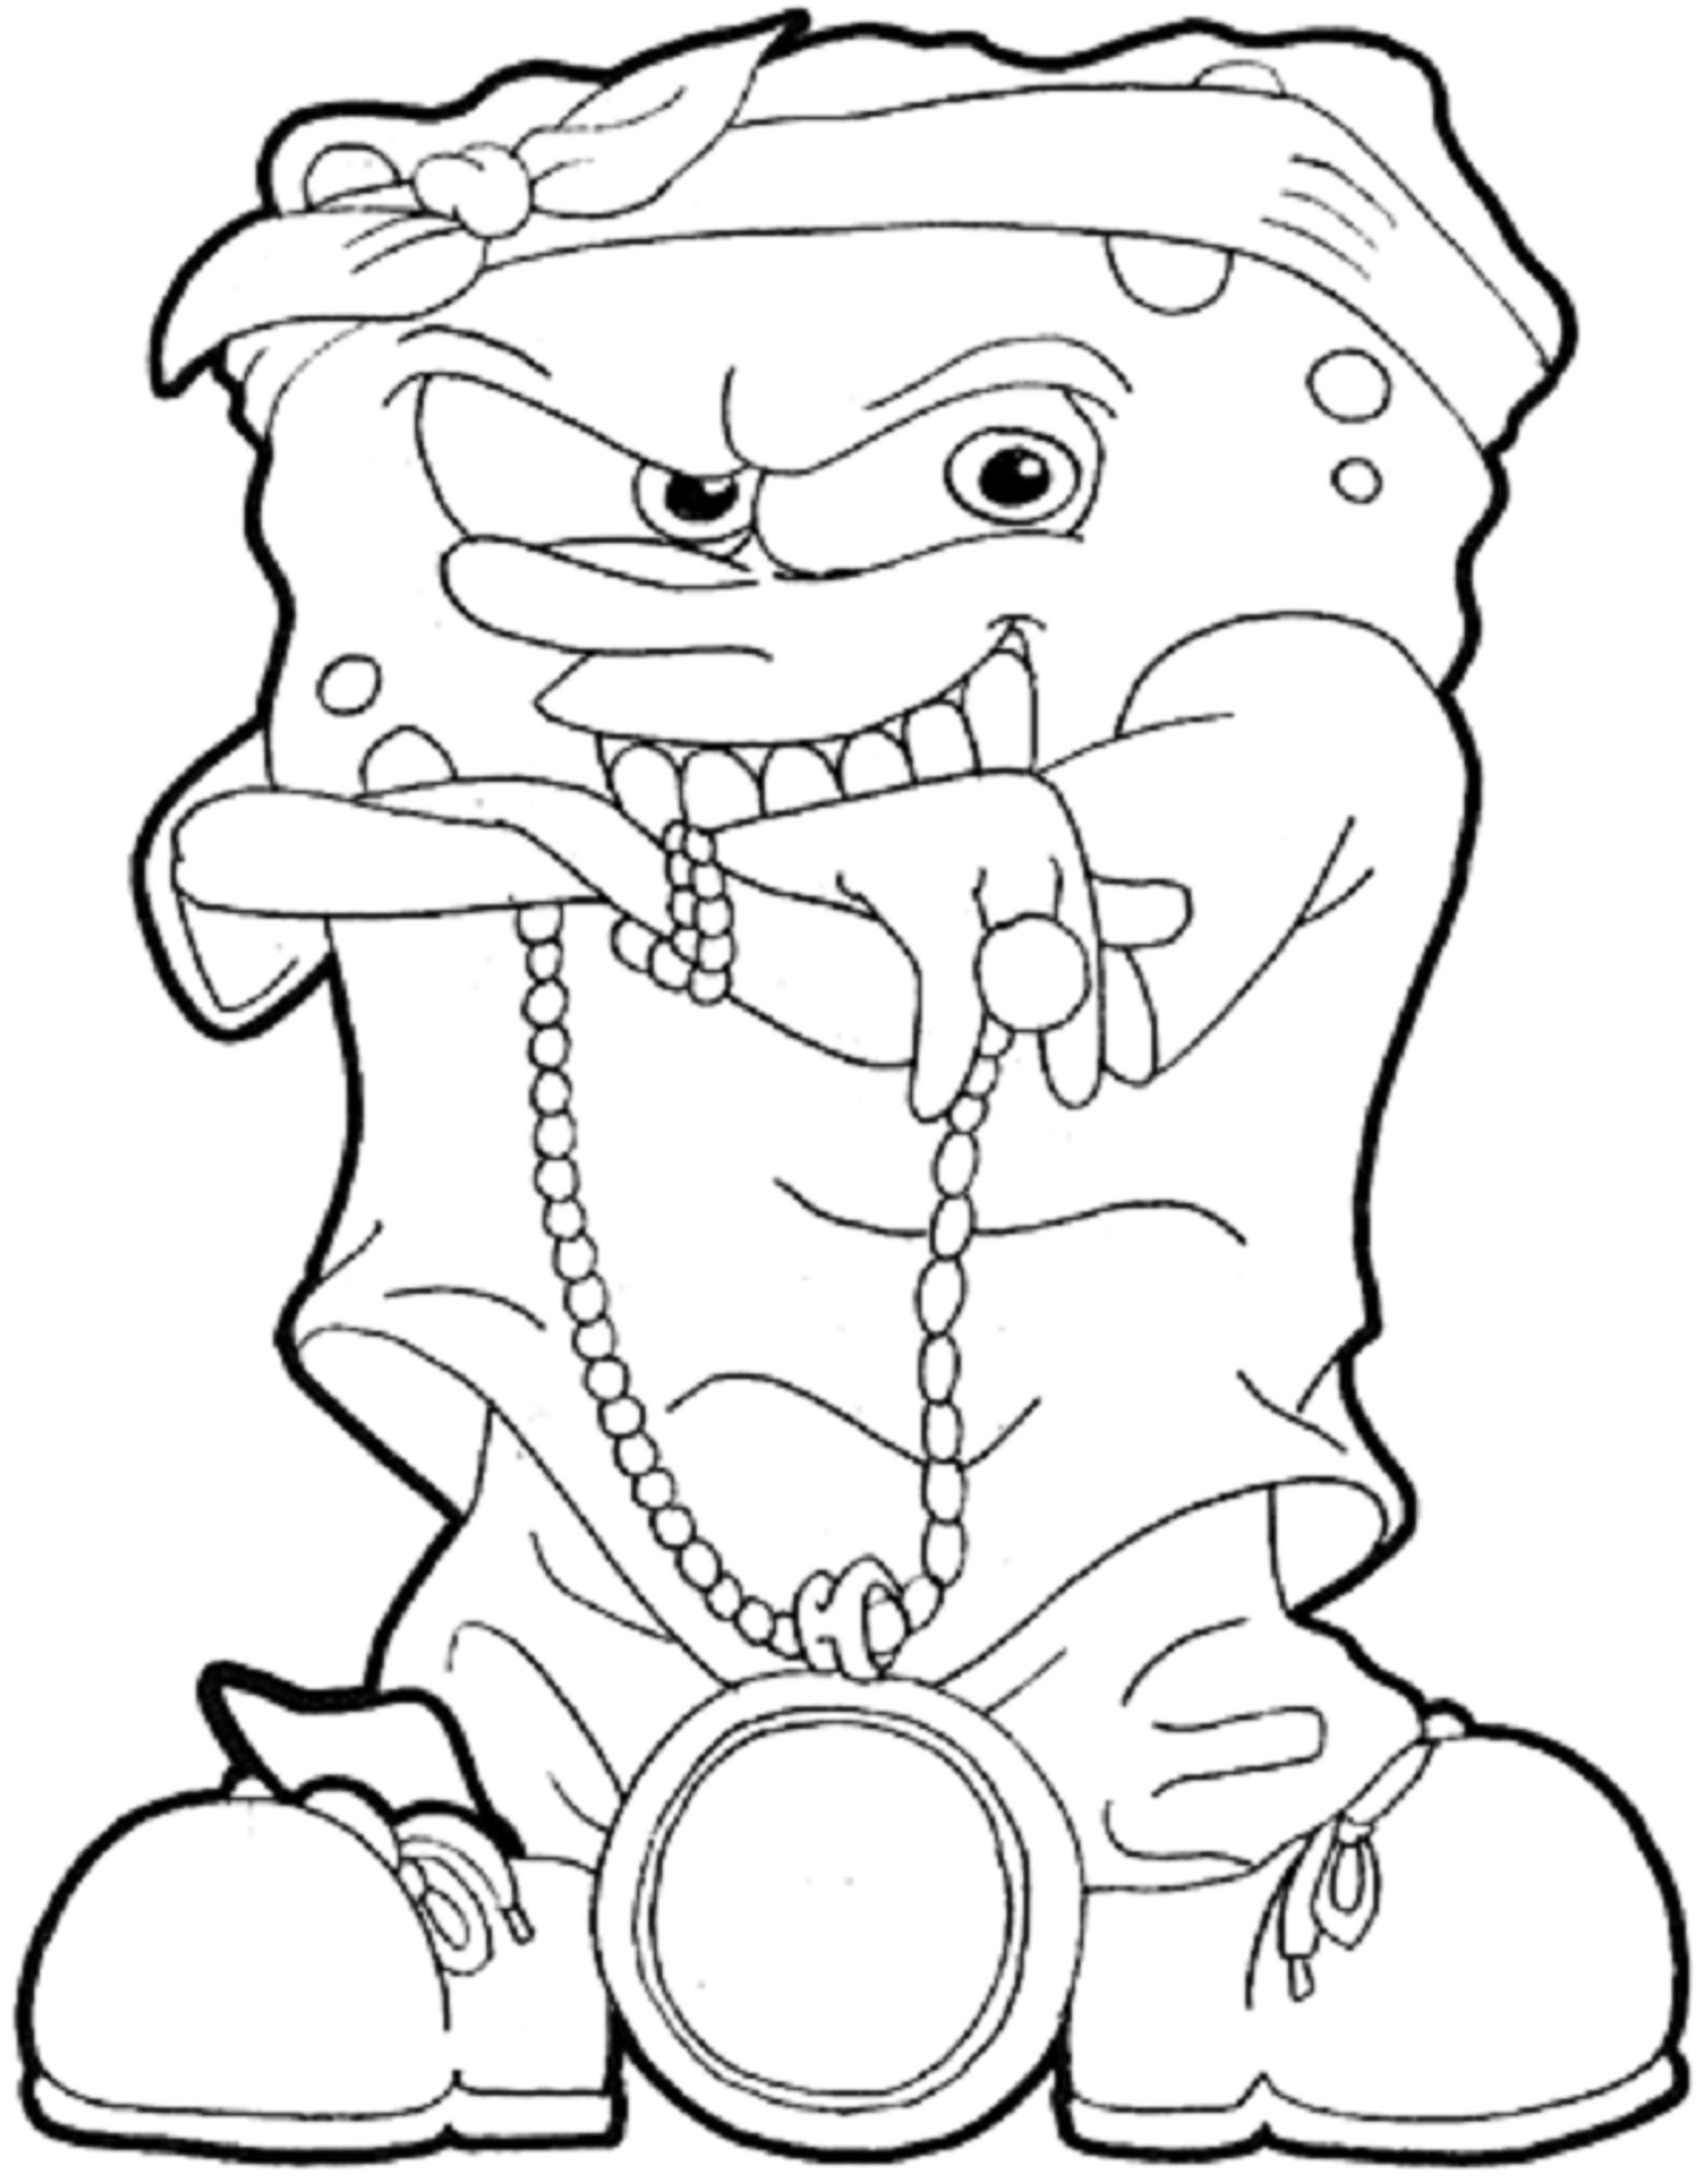 28 collection of spongebob in the hood coloring pages high